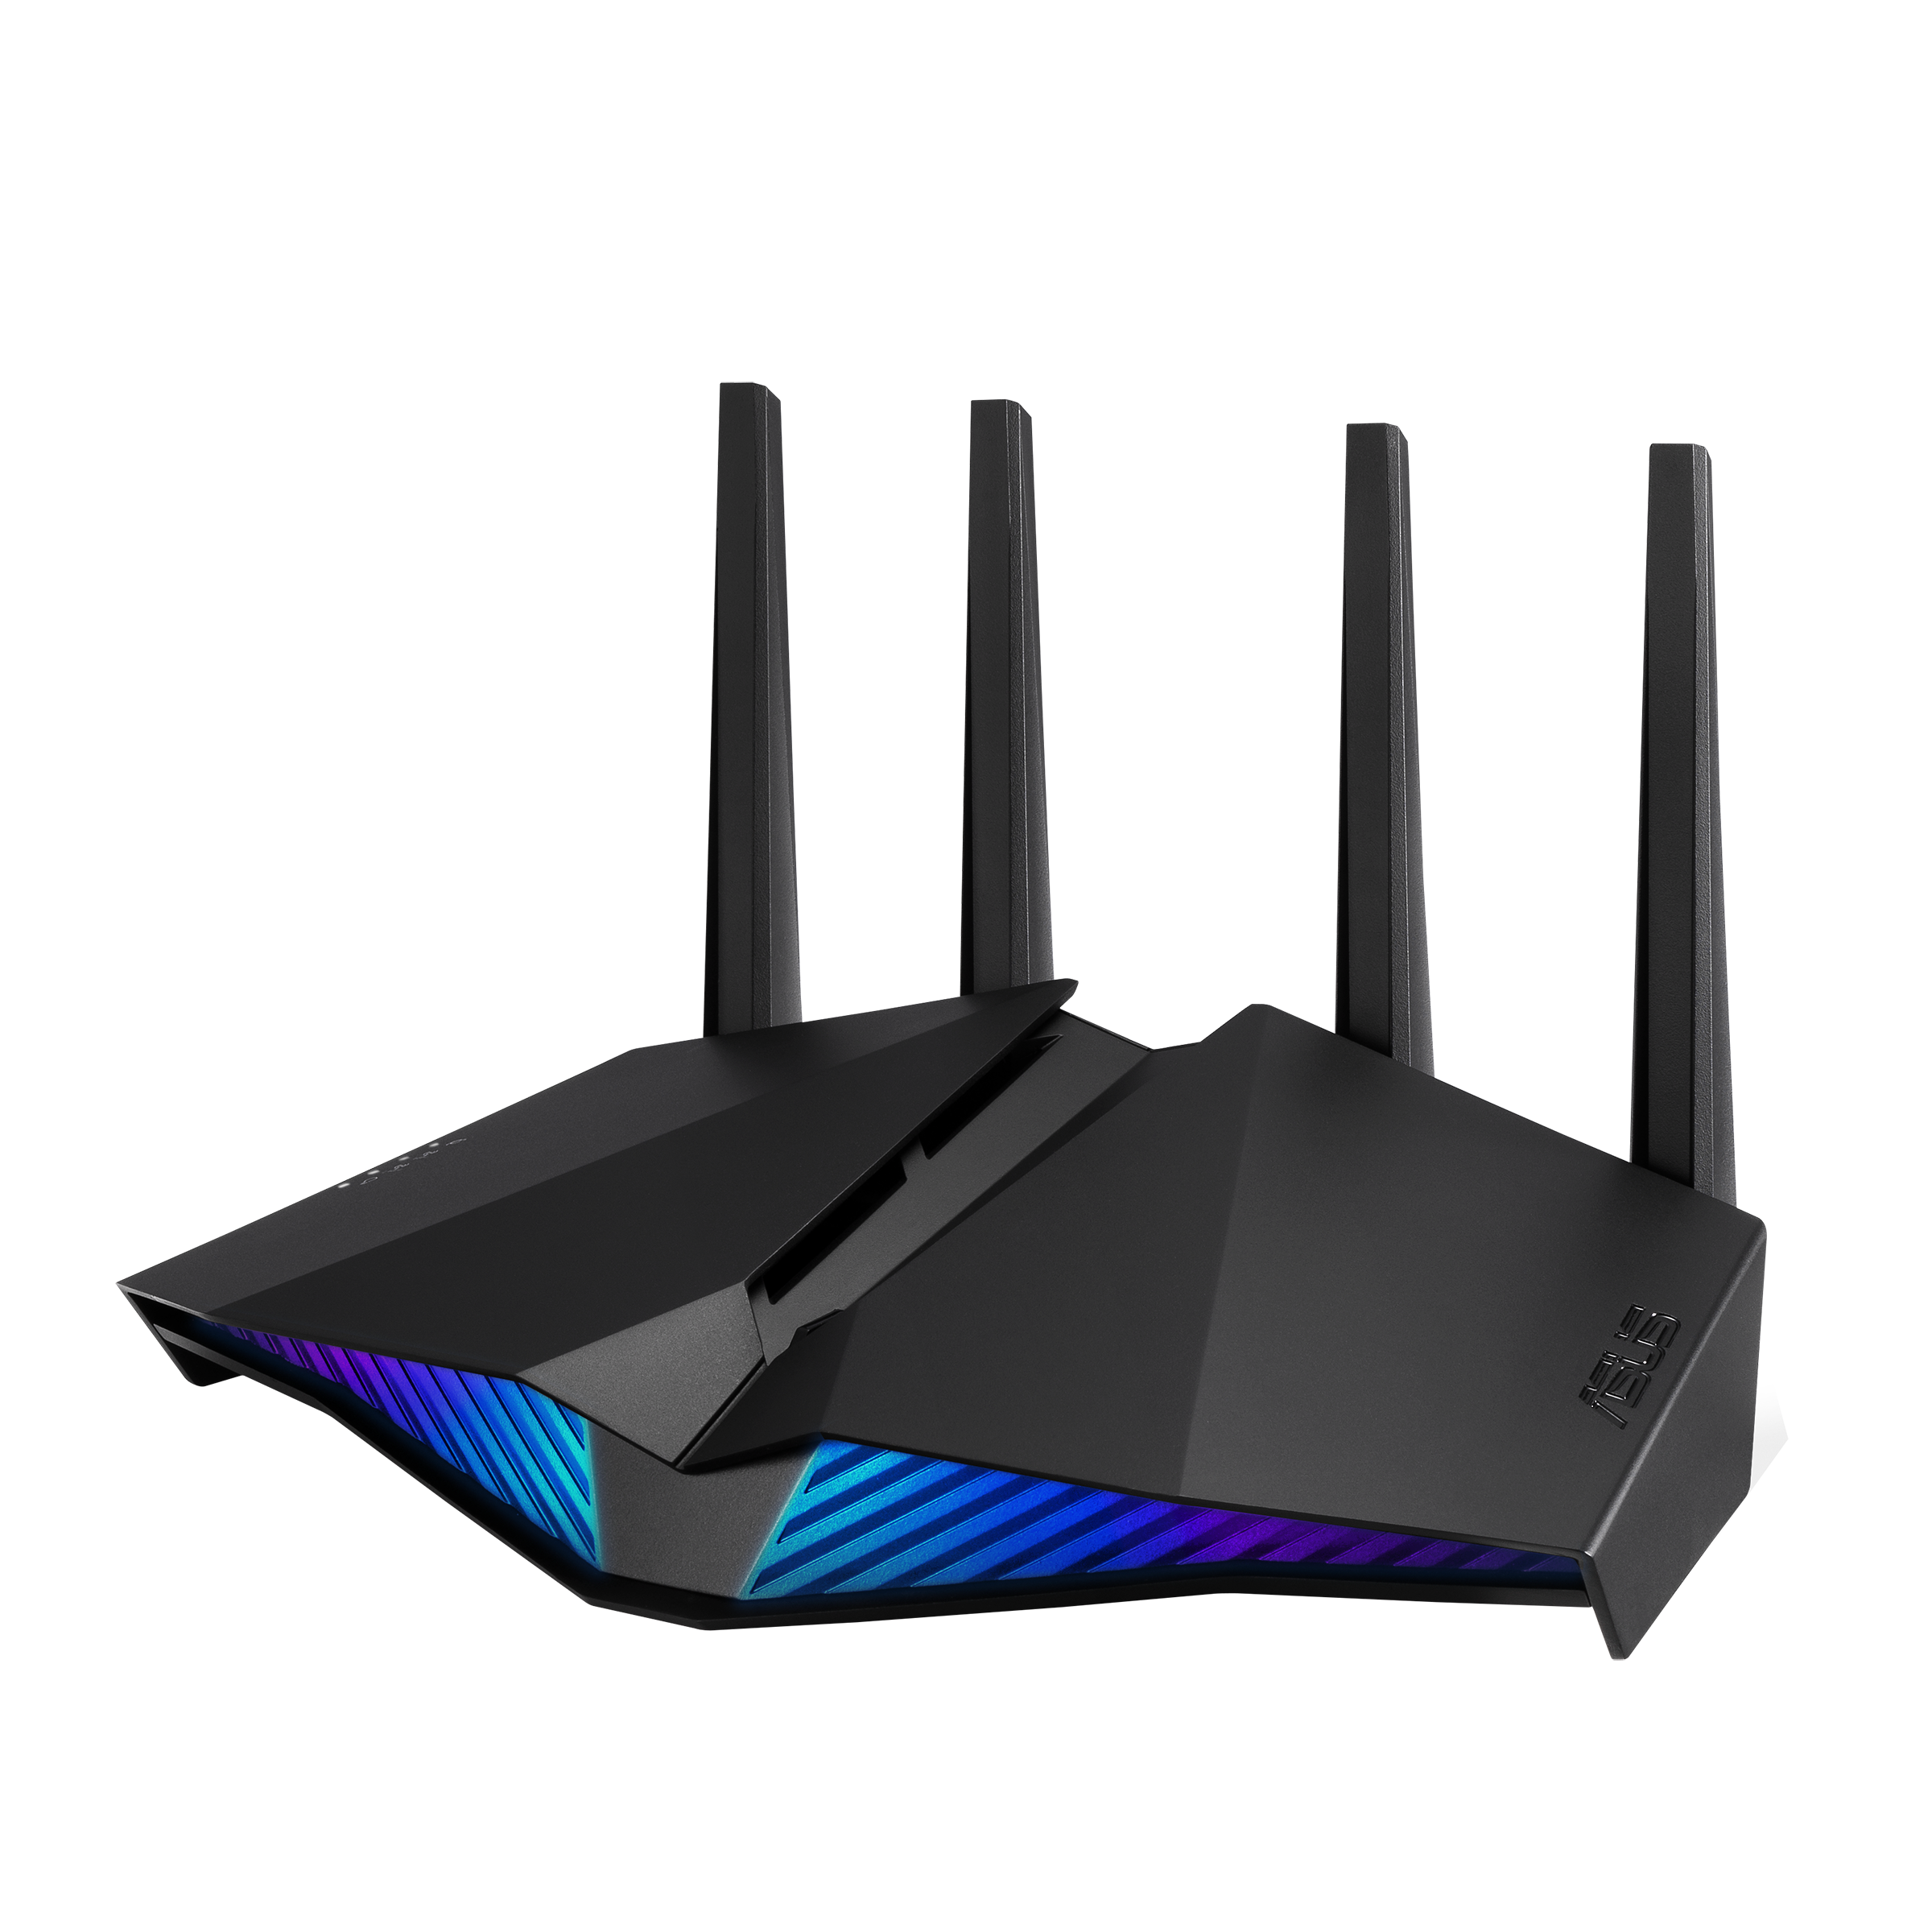 DSL-AX82U｜WiFi 6｜ASUS Middle East